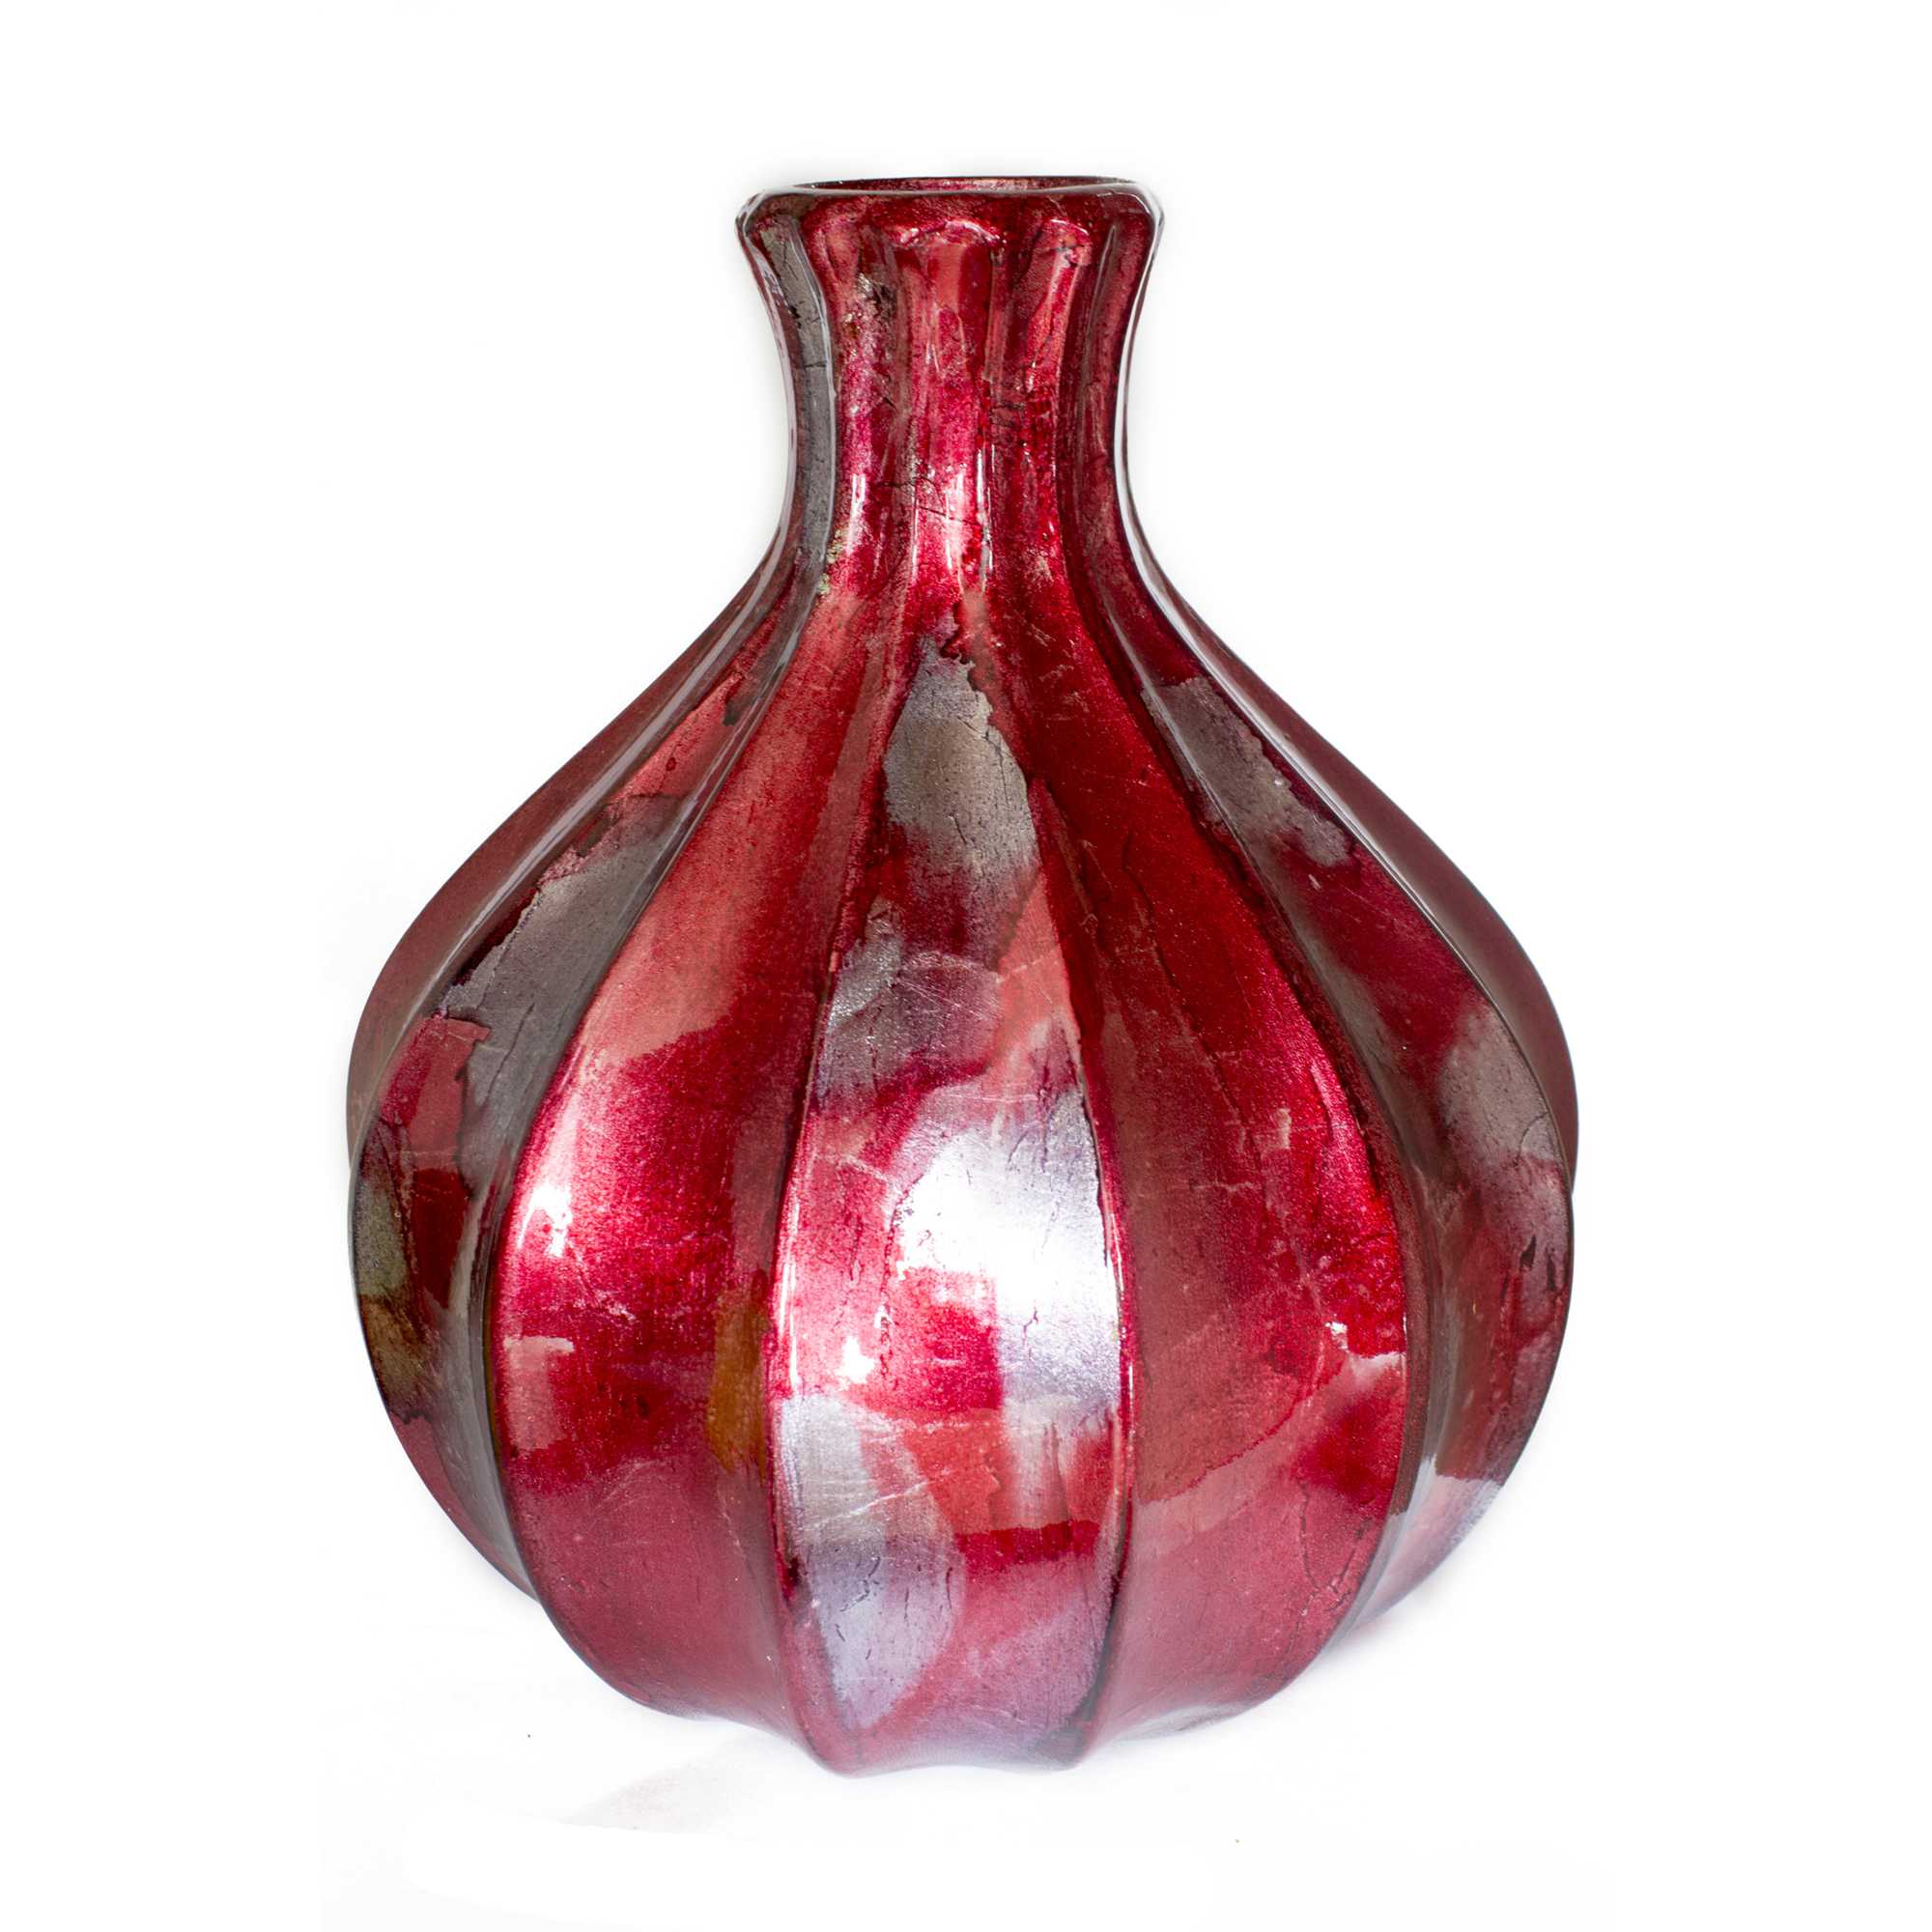 8.75" X 8.75" X 10" Red Ceramic Foiled and Lacquered Gourd Vase